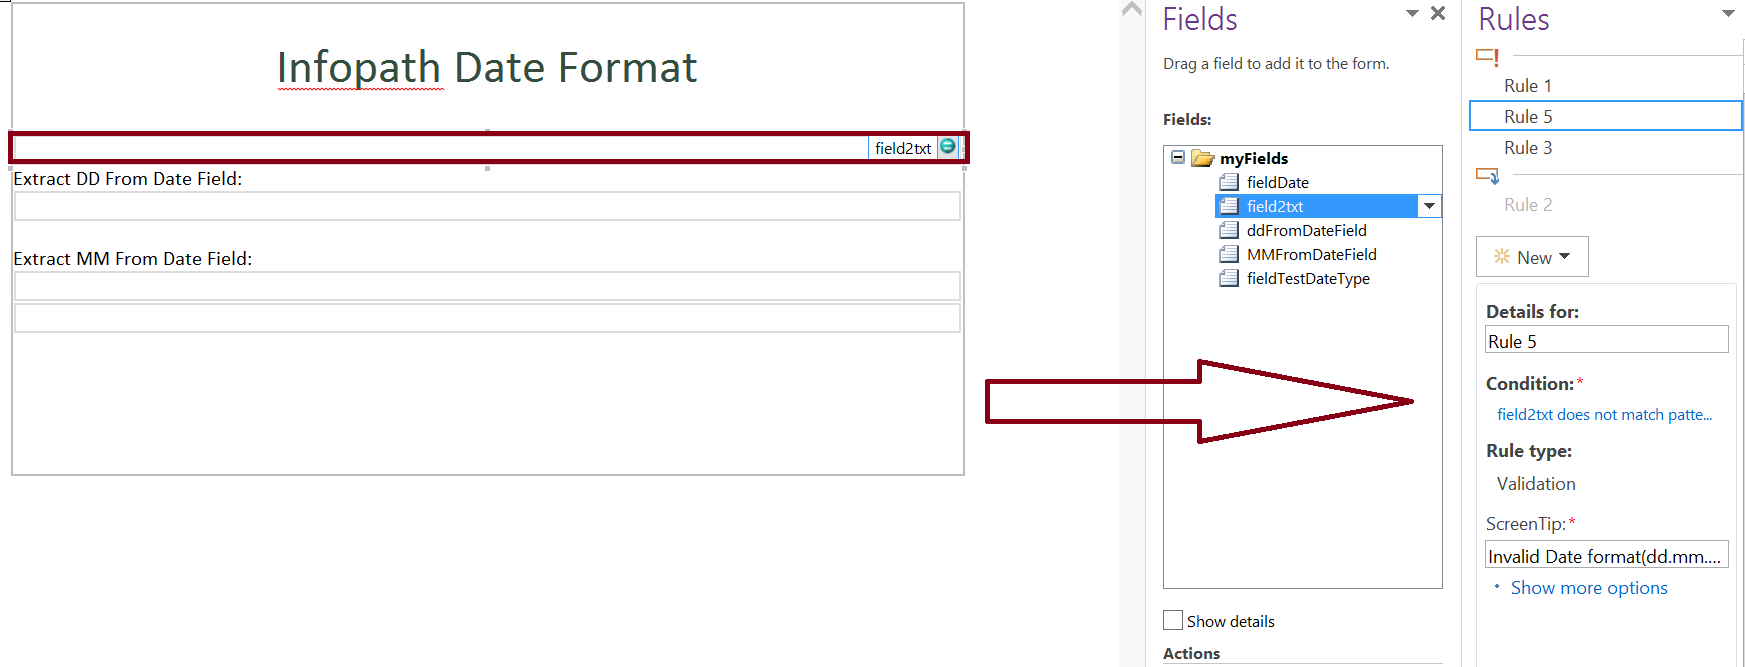 Date format validation in infopath form - does not match custom pattern